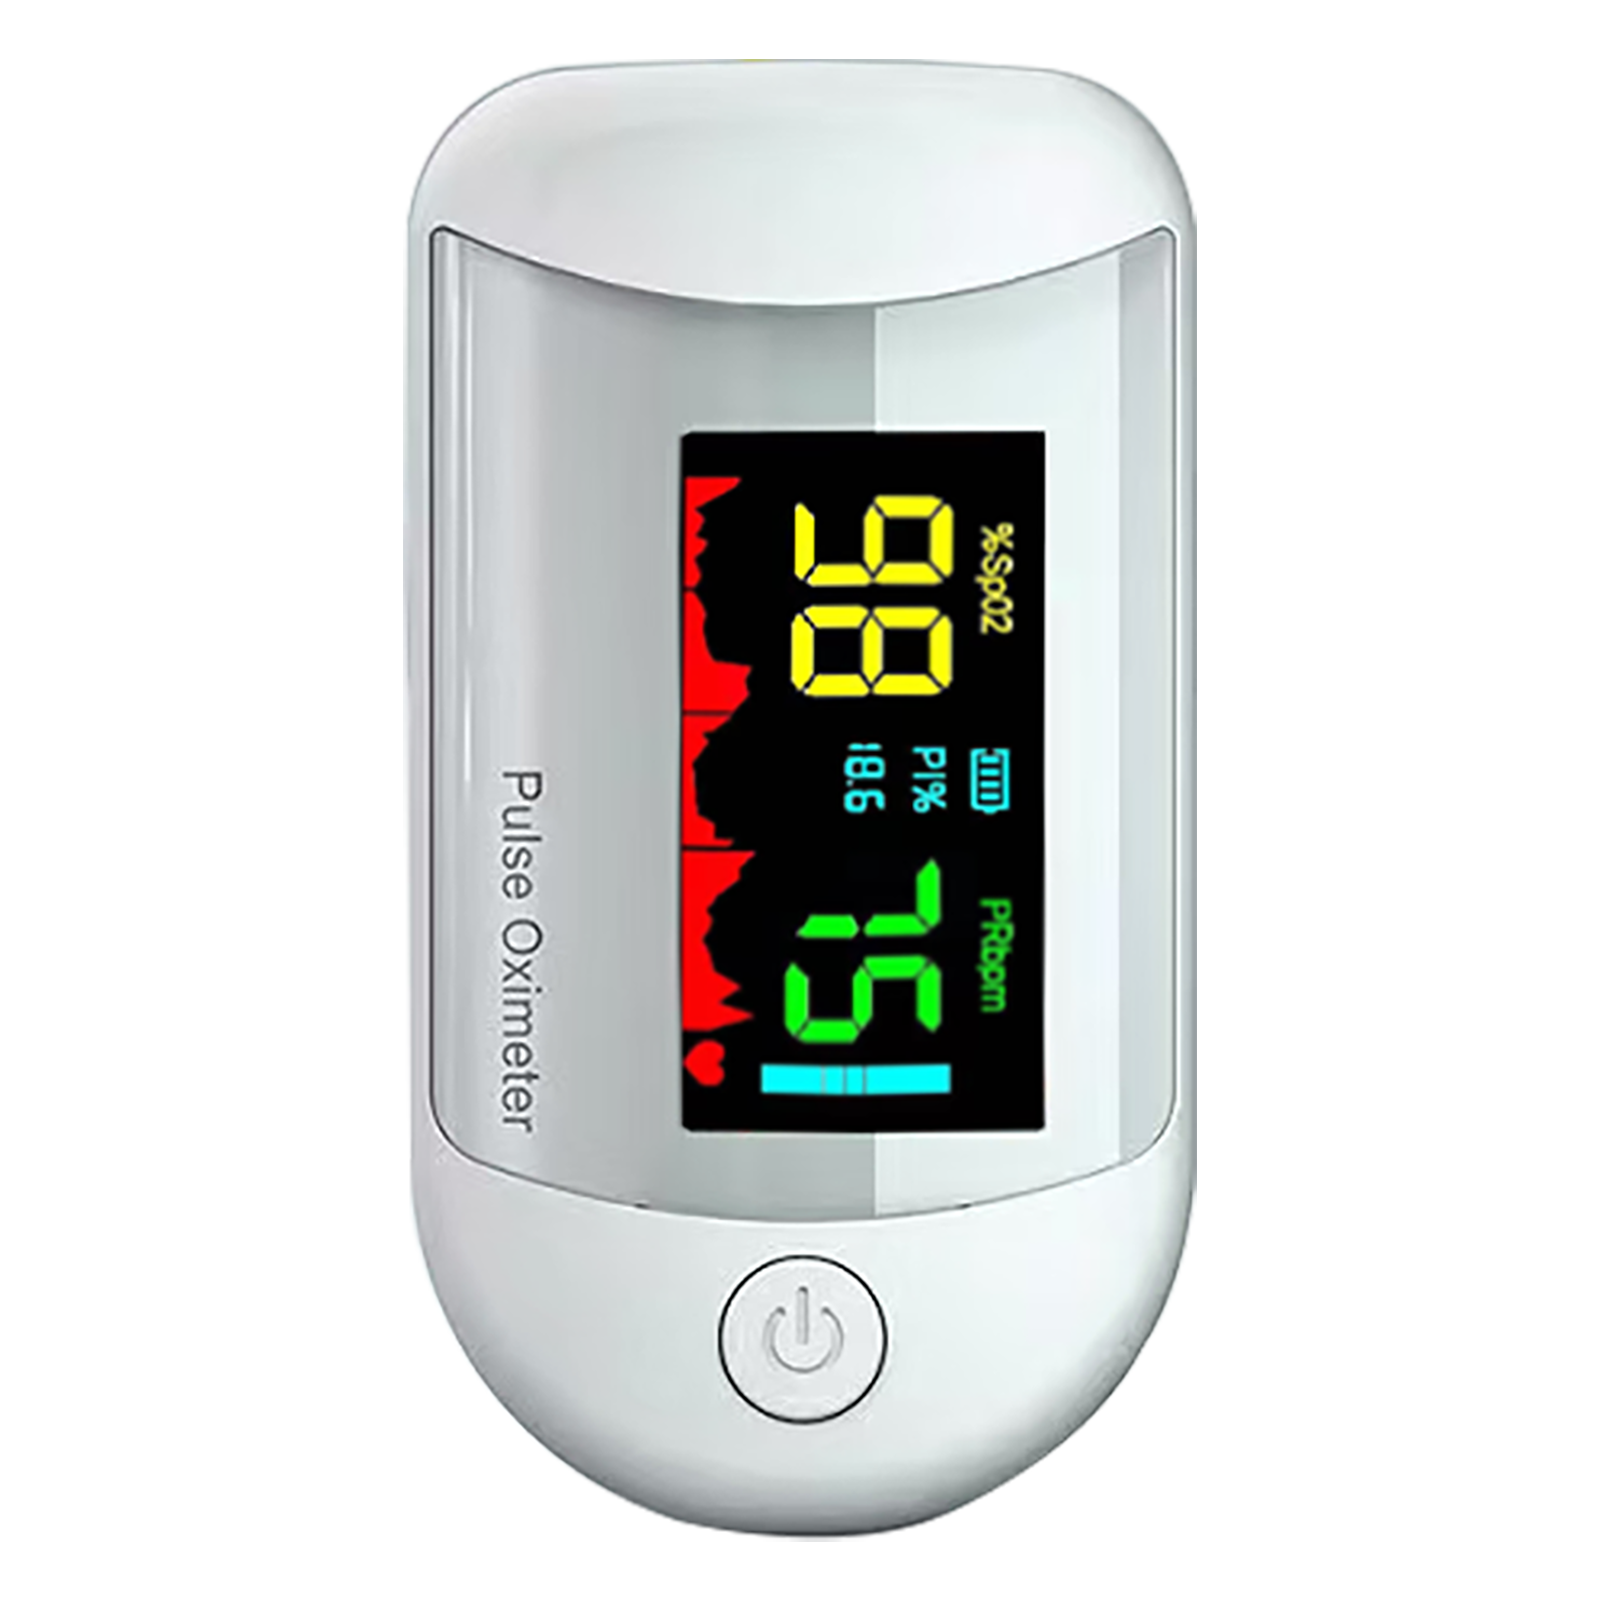 IGear - iGear Health Digital Pulse Monitor/Oximeter (Perfusion Index of 0.3%, iG-A3, White)